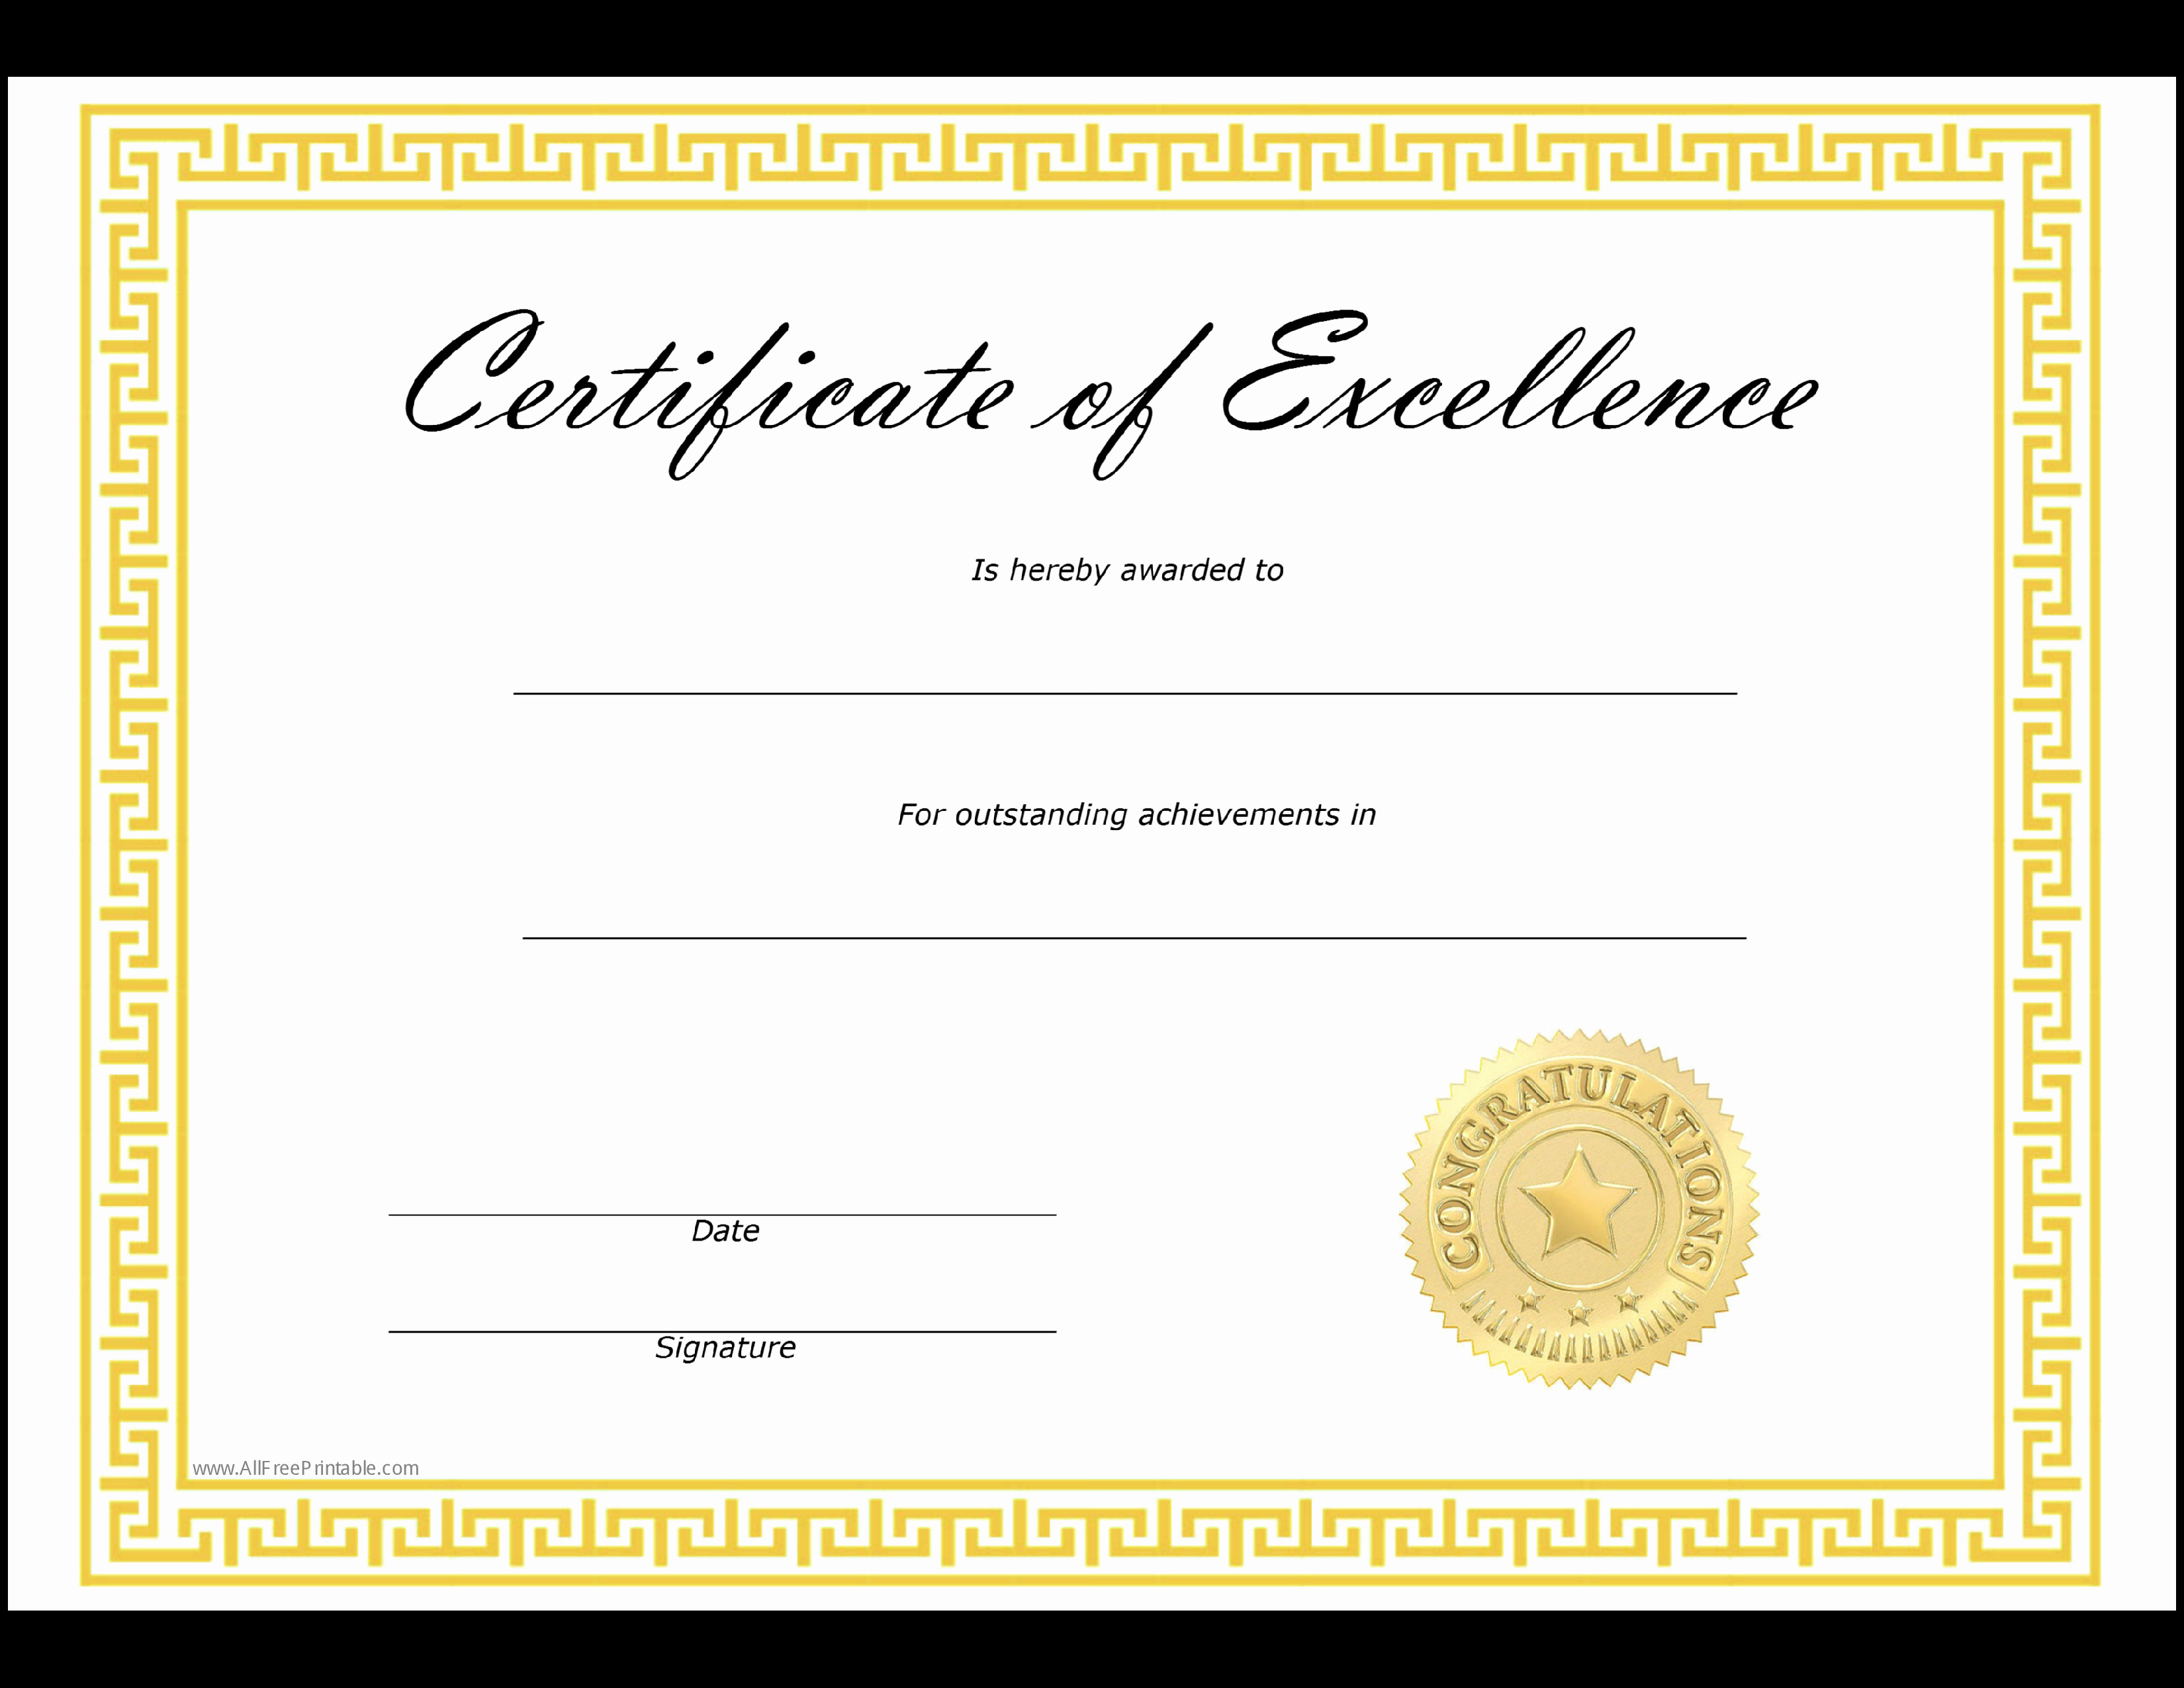 Certificate Of Excellence Template Fresh Free Certificate Of Excellence